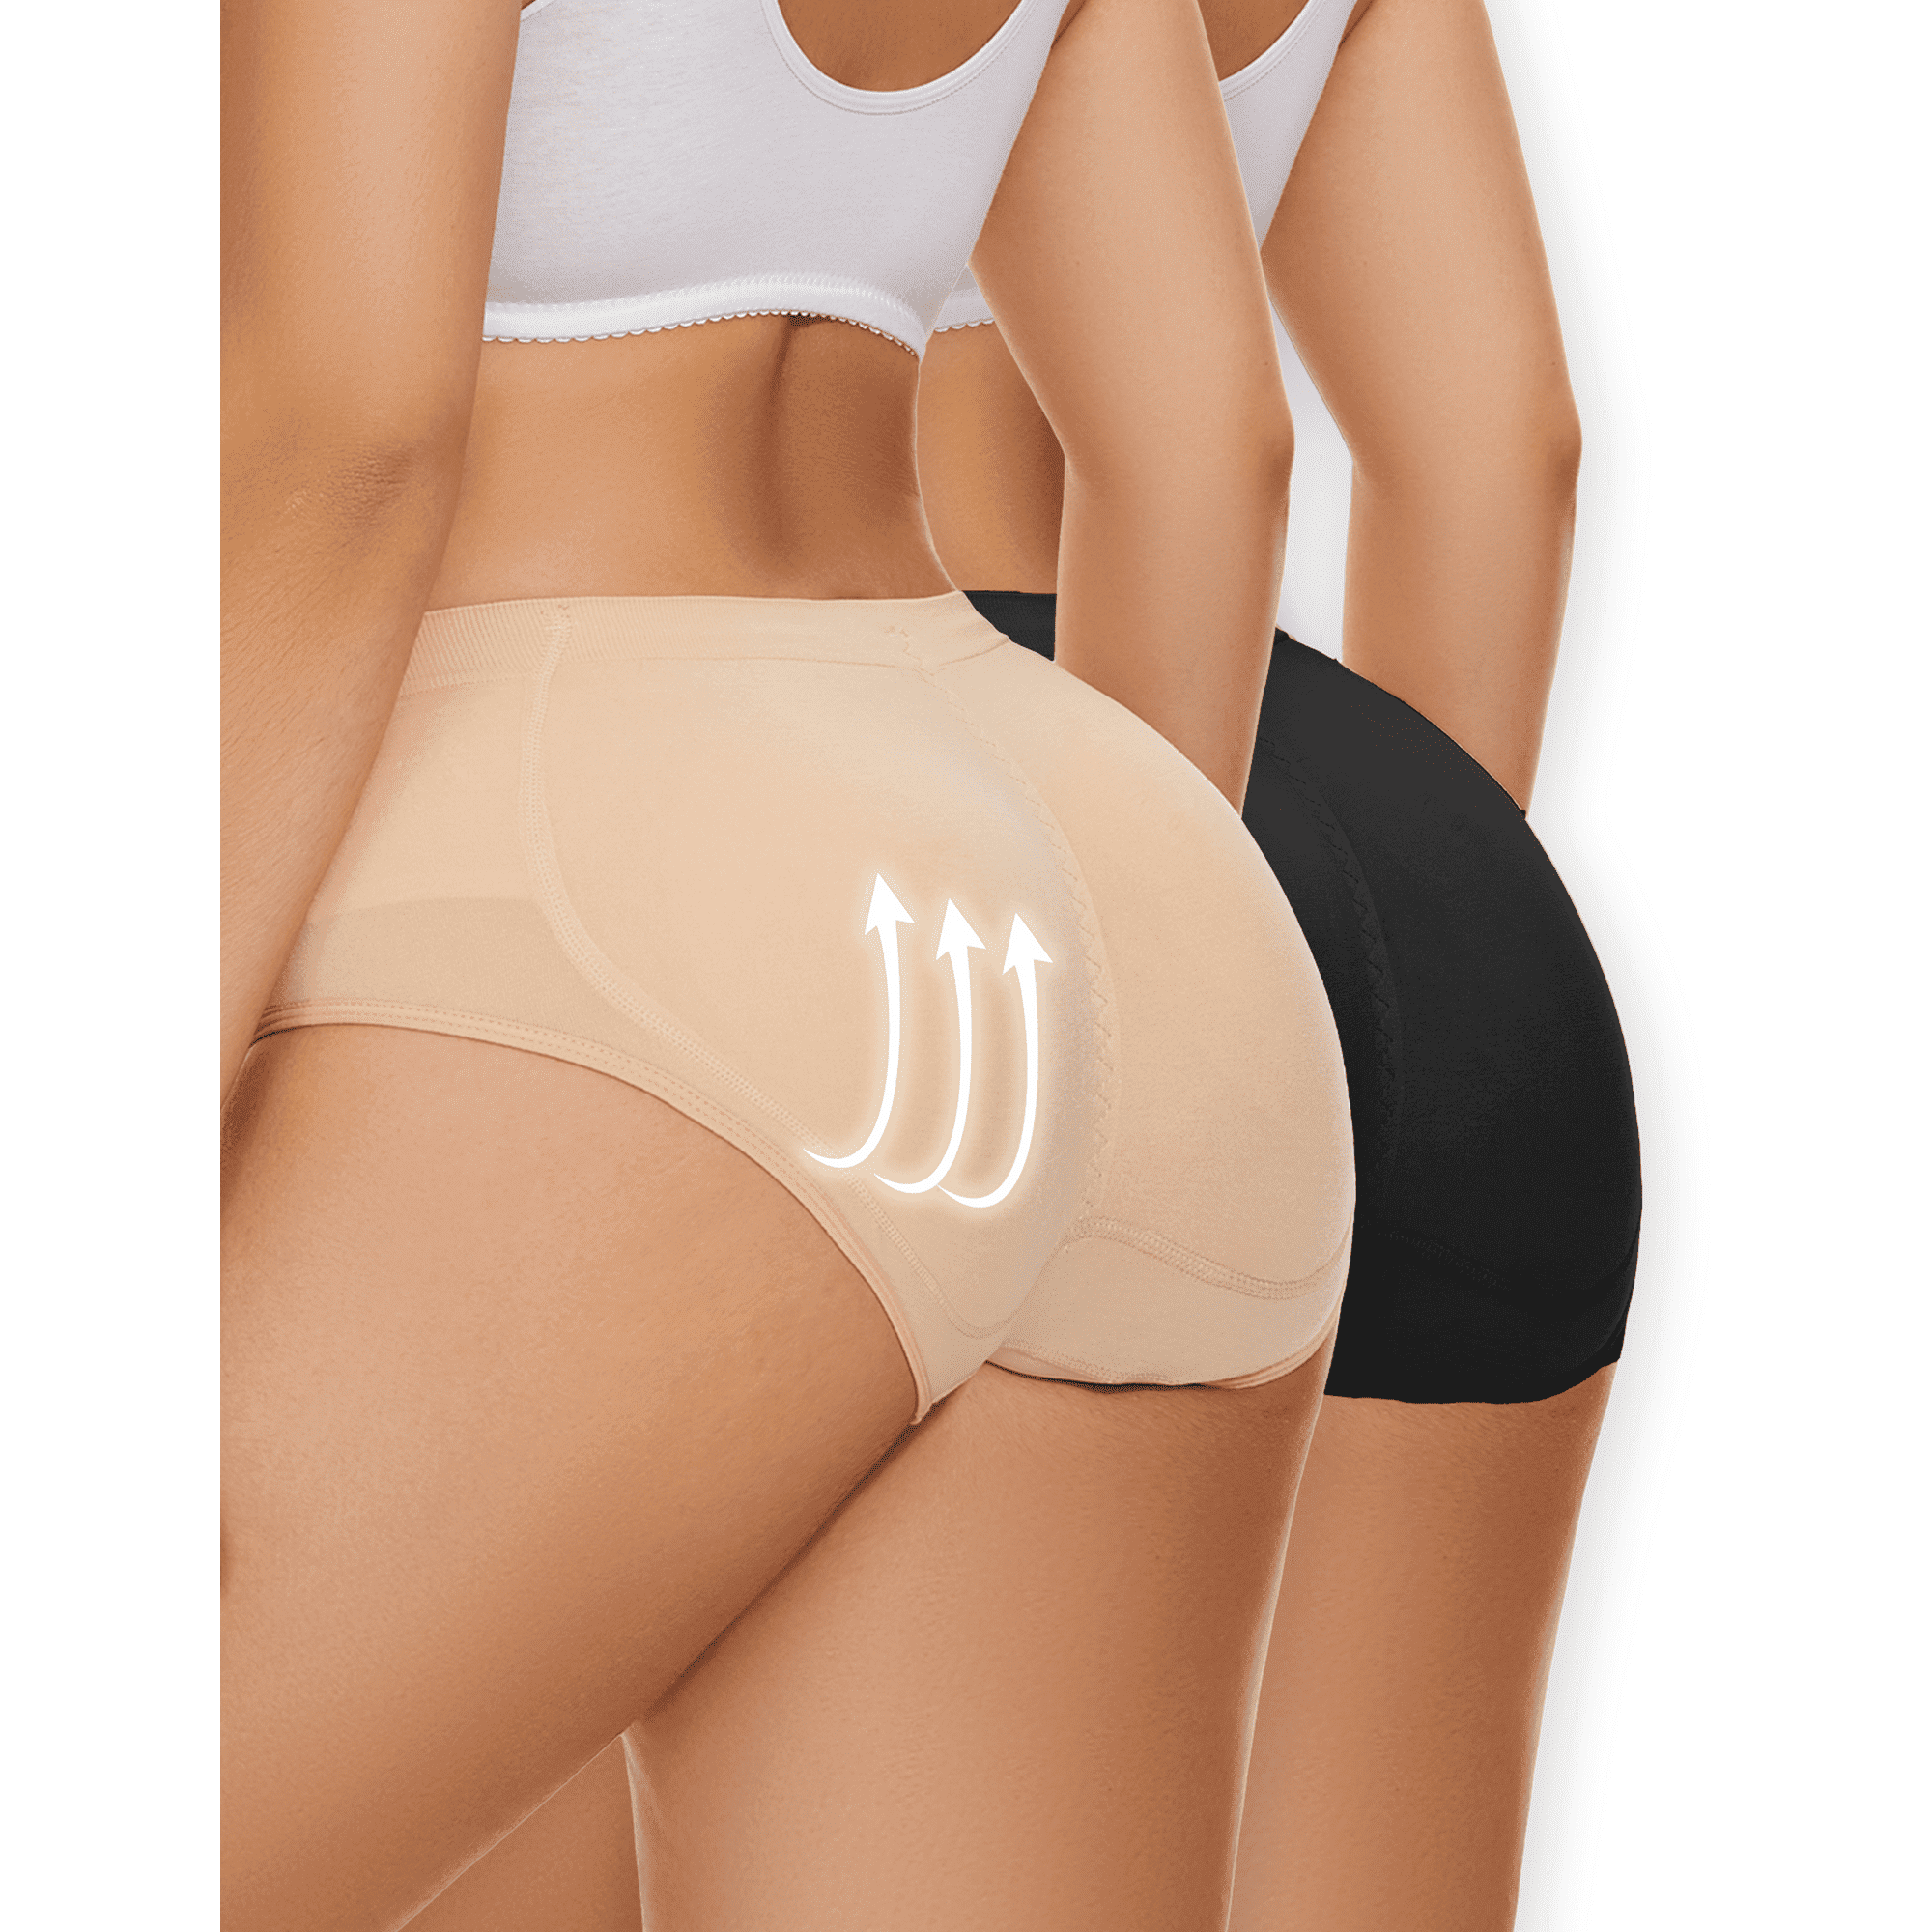 BUTT ENHANCER Padded REMOVABLE PADS BOOSTER 1- 6 PANTIES UNDIES